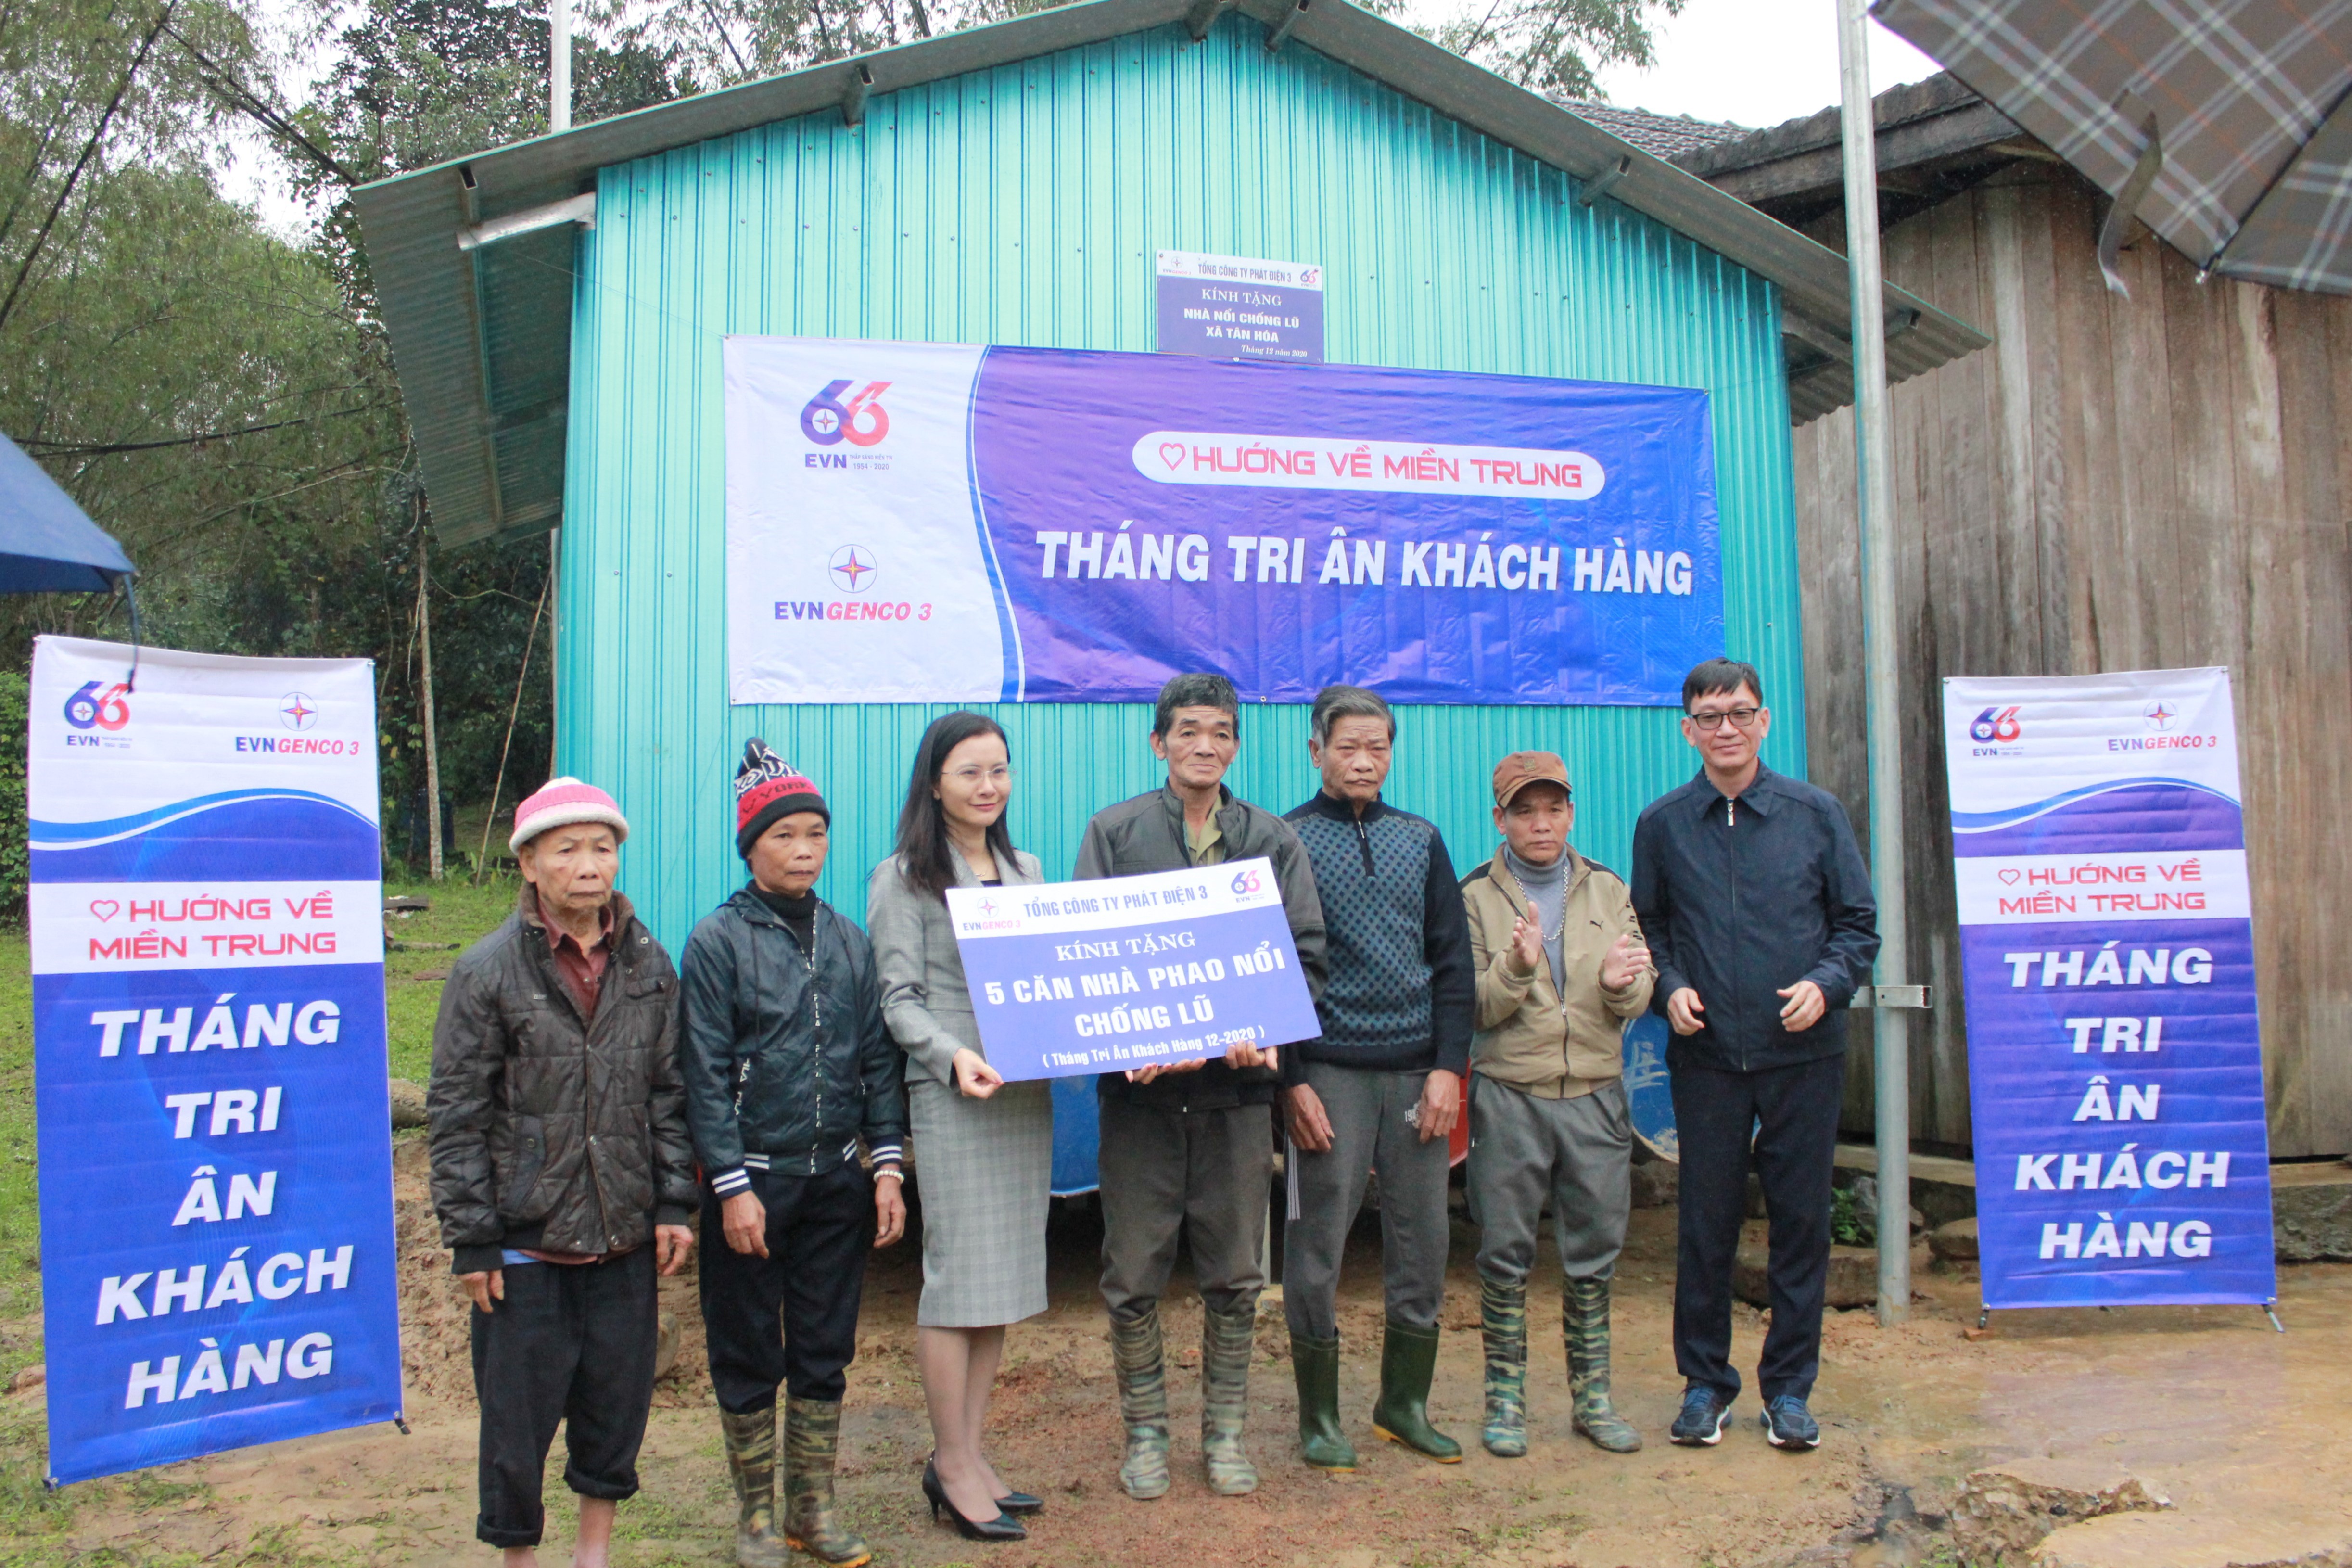 EVNGENCO 3 donated 05 Flood-resistant houses in Tan Hoa commune, Minh Hoa District, Quang Binh Province